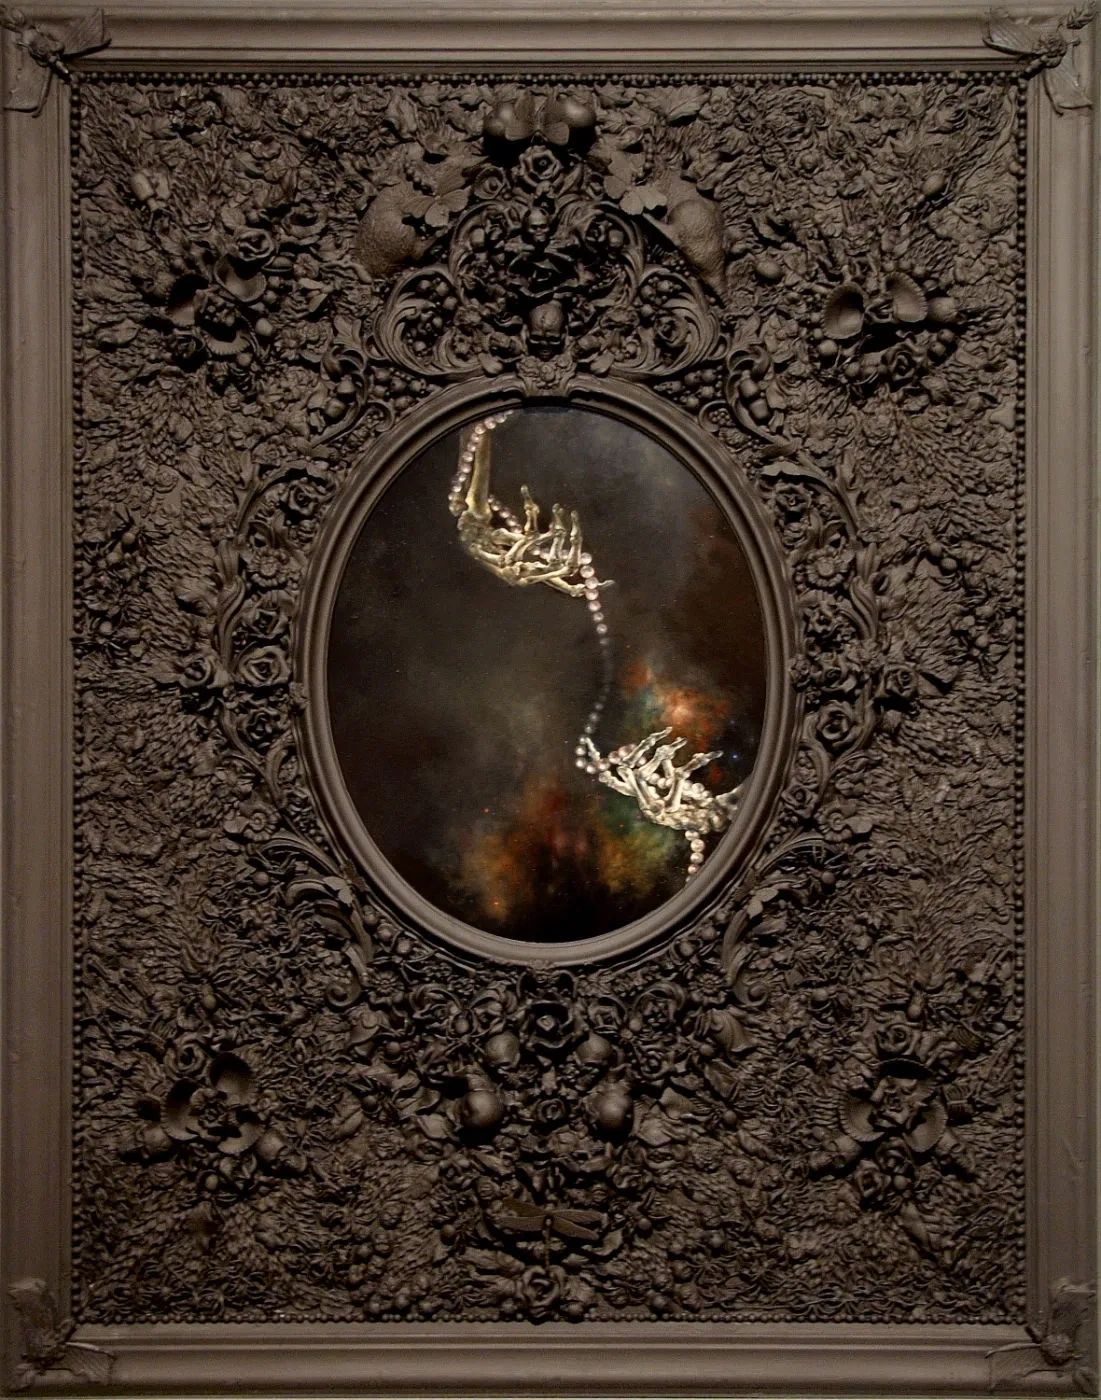 Oil painting. Large, Gothic black frame. Oval insert with skeletal hands reaching to each other. 